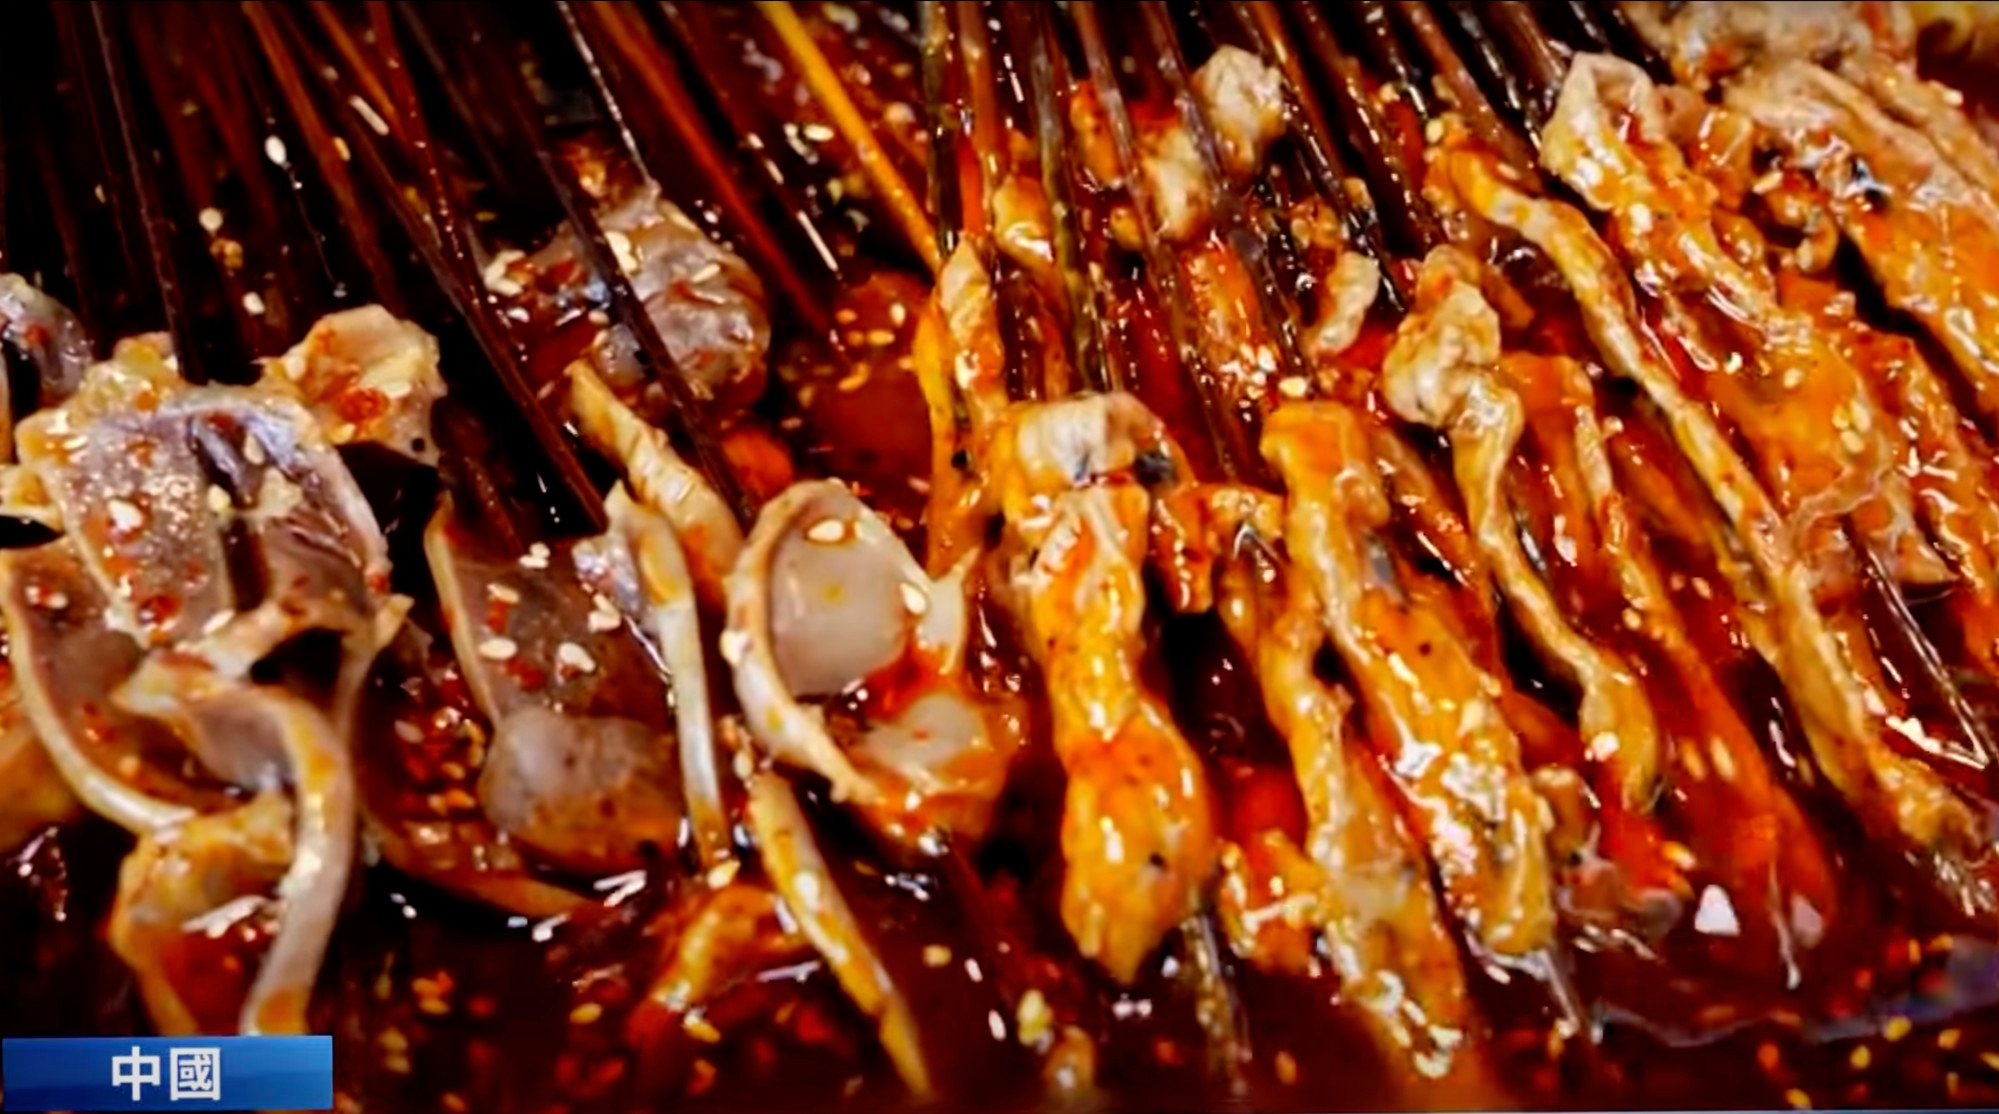 Bo Bo Chicken is a skewered snack that includes meat and offal from the bird, plus vegetables and other meats. Photo: YouTube